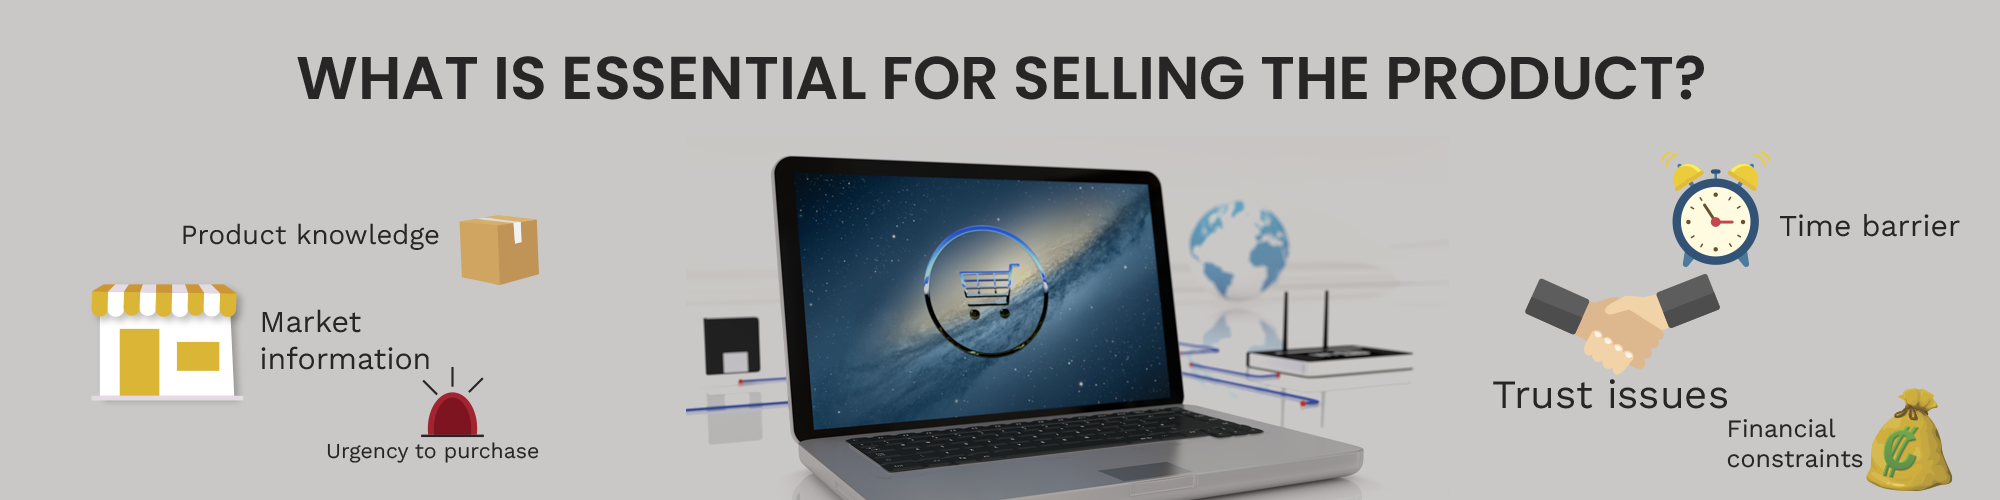 What Is Essential for Selling the Product?